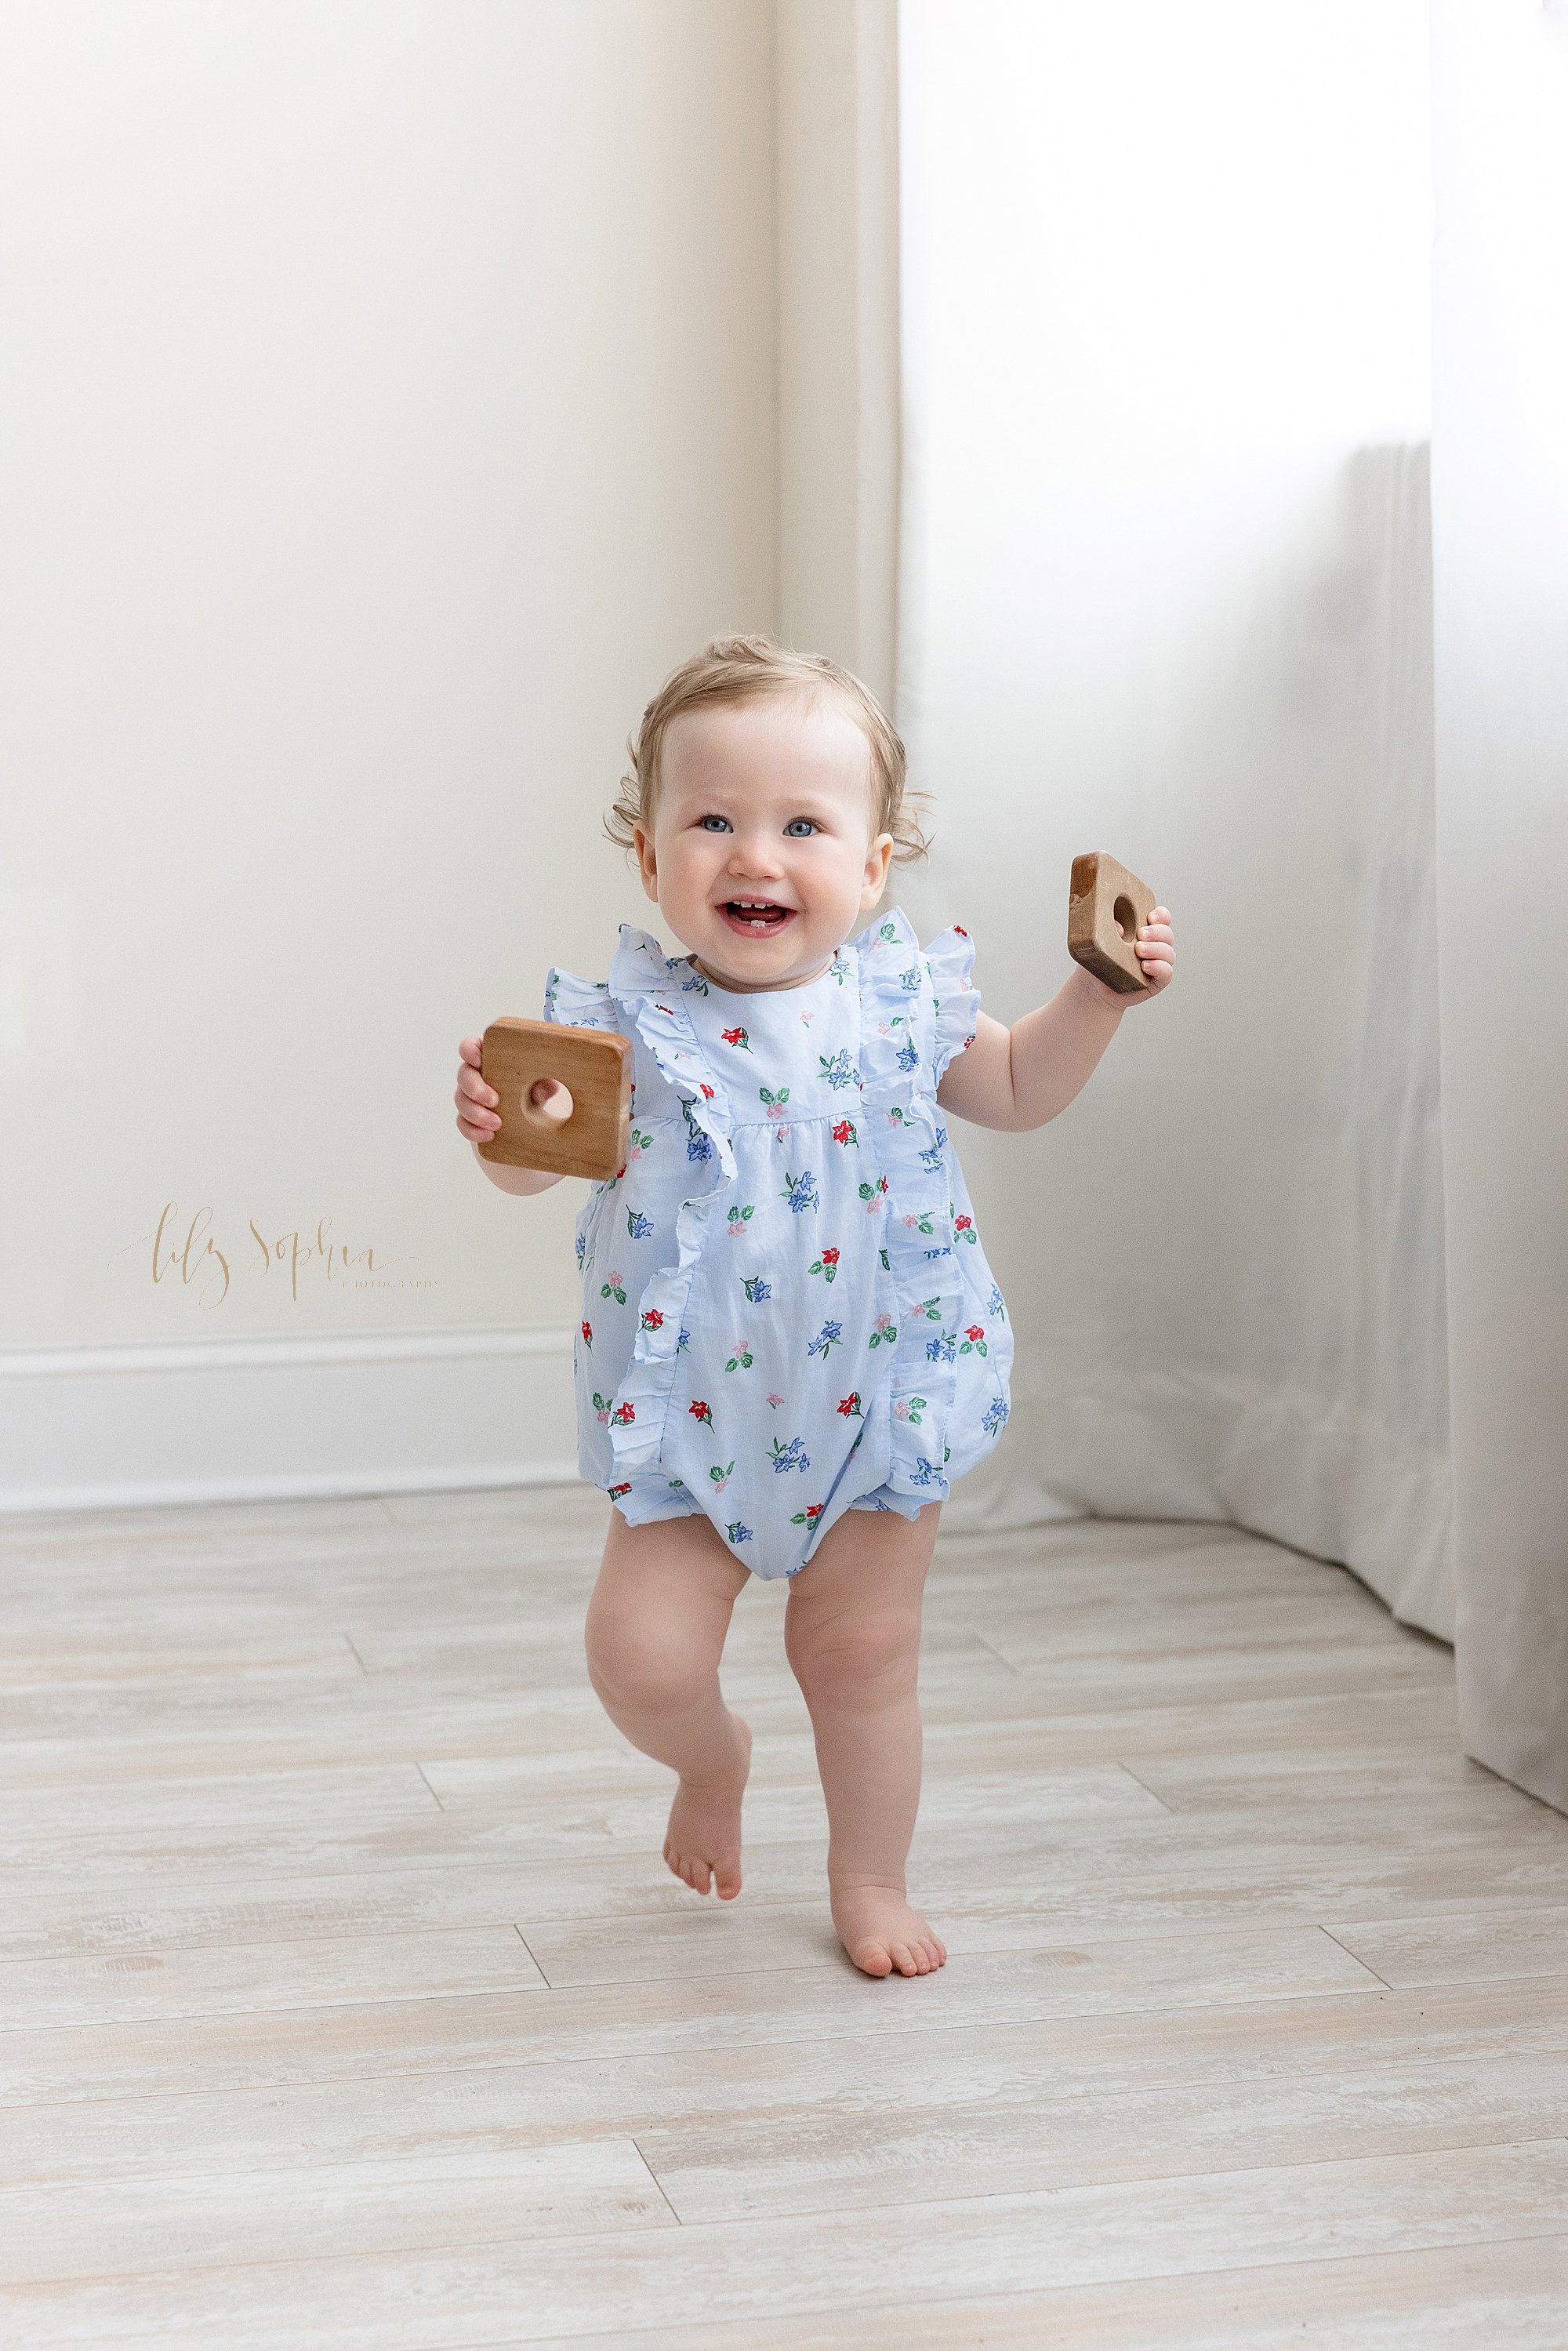  Baby photo of a smiling one year old baby girl as she walks on her own carrying wooden stacking pieces in a studio using natural light for her first birthday photo shoot taken near Poncey Highlands in Atlanta. 